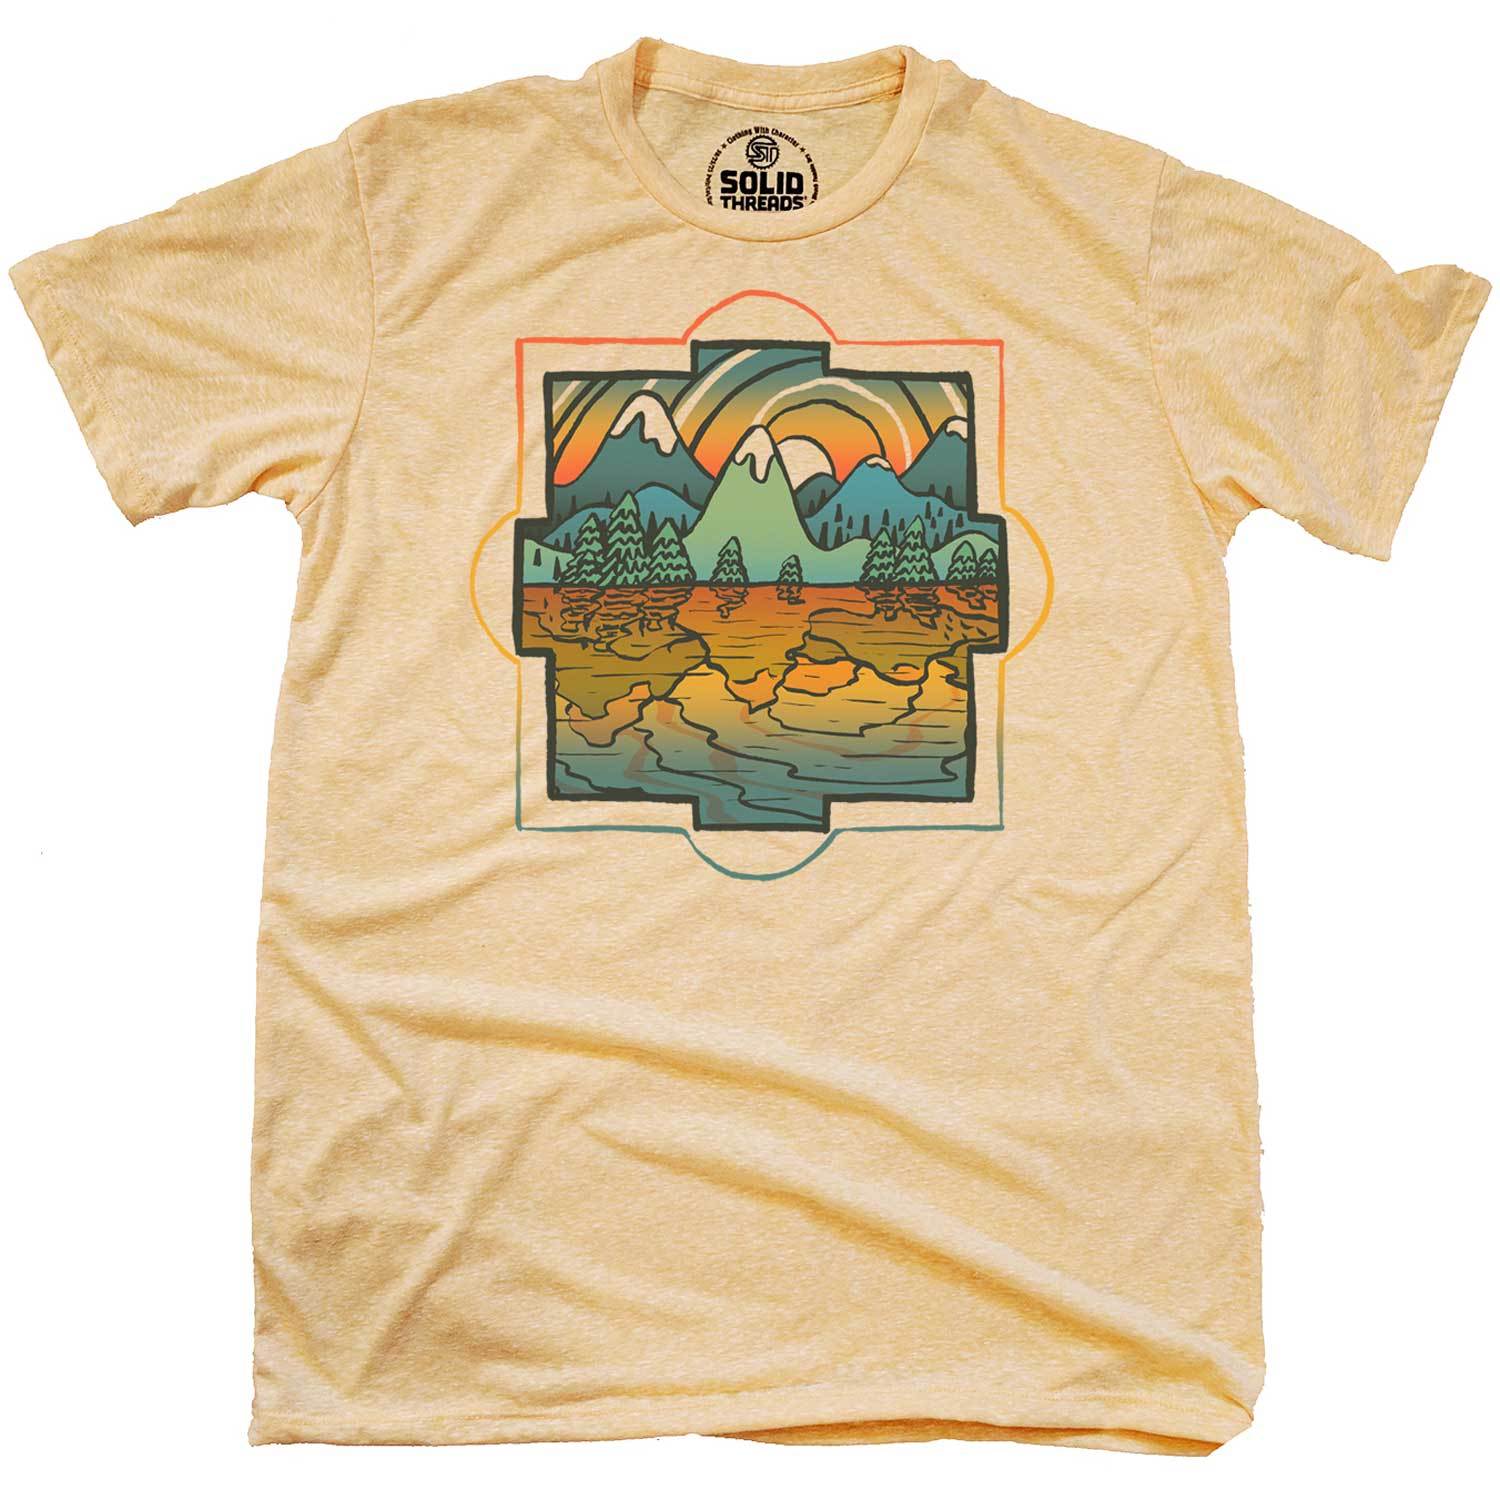 Men's Reflections Retro Colorful Lake Graphic Tee | Vintage Artsy Mountains T-Shirt | Solid Threads